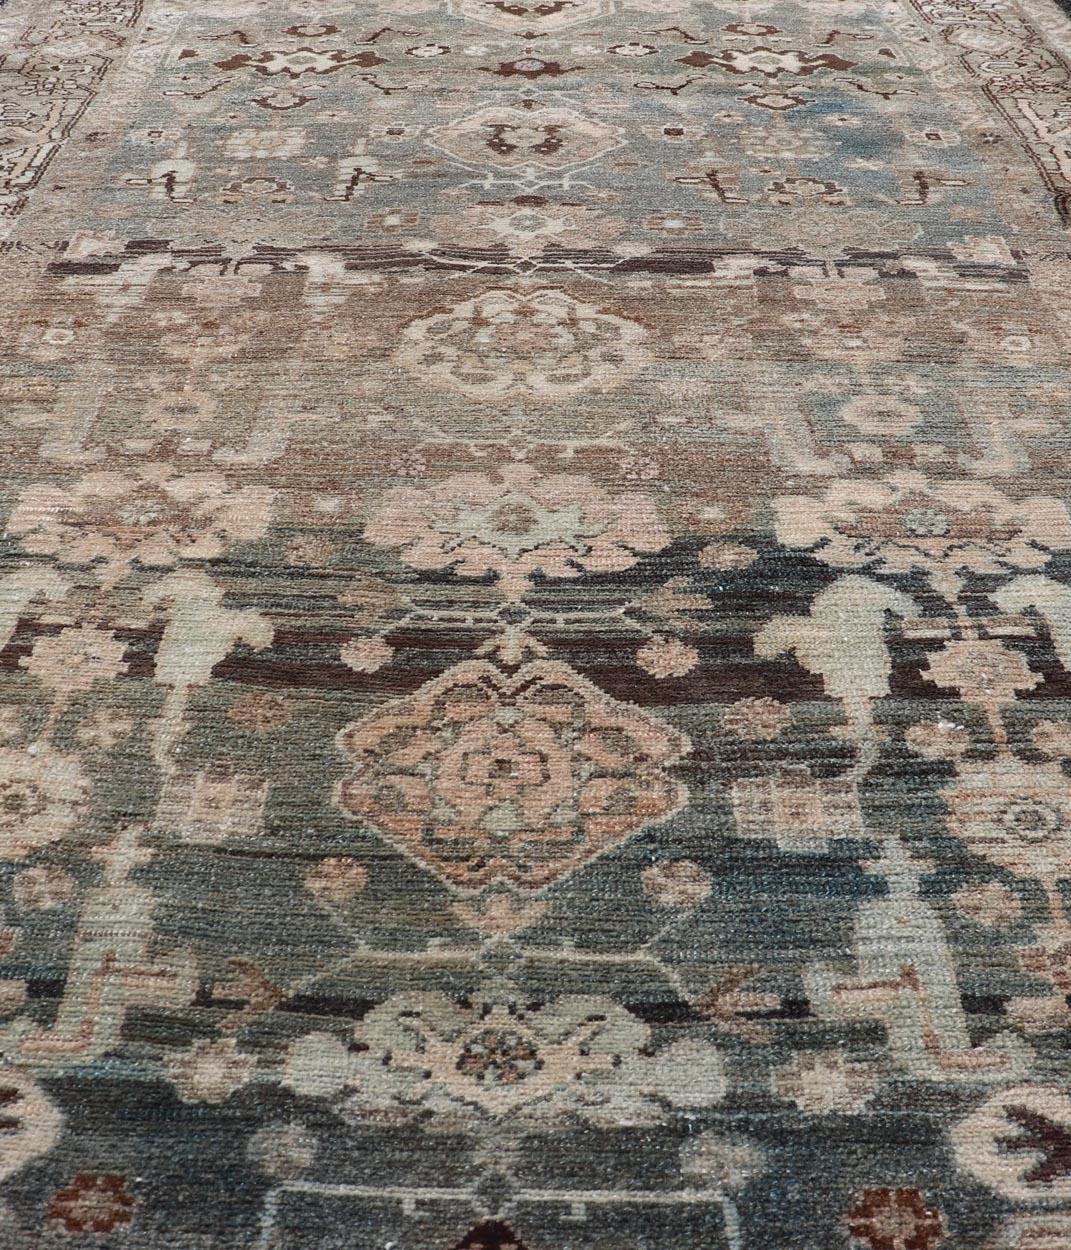 Antique Nahavand Rug with All-Over Sub-Geometric Design in Muted Colors In Good Condition For Sale In Atlanta, GA